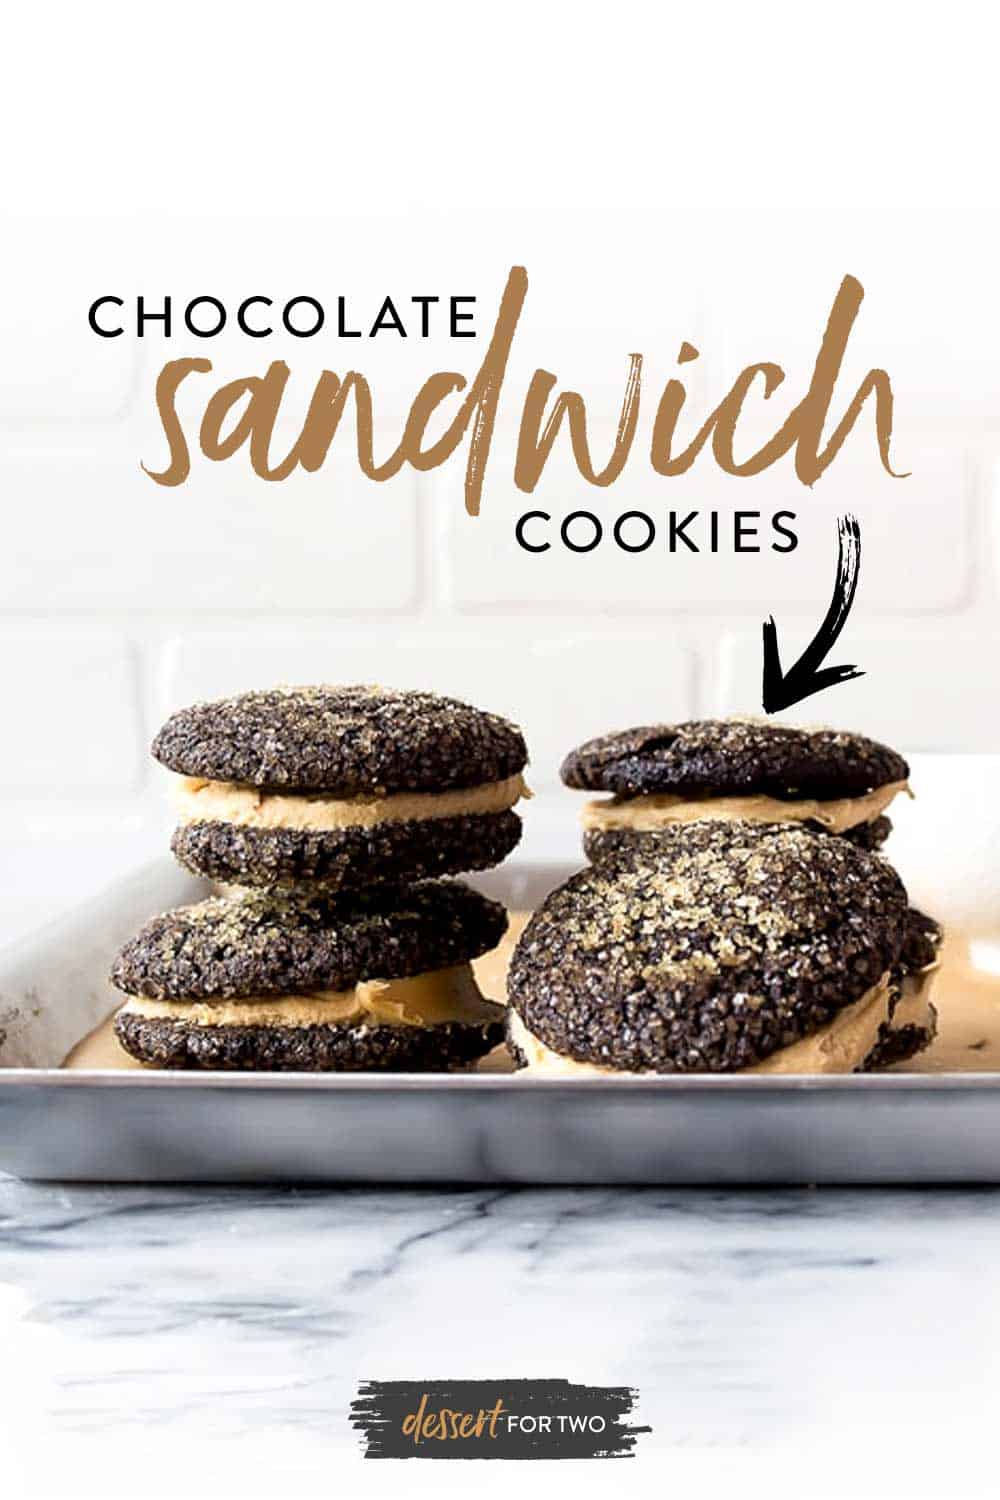 Chocolate Sandwich Cookies with Salted Caramel Buttercream Filling. No chill time required for these soft chocolate cookie sandwiches with buttercream. #chocolatesandwich #chocolatesandwichcookies #saltedcaramel #caramel #cookiesandwich #cookiesandwiches #caramelbuttercream #buttercream